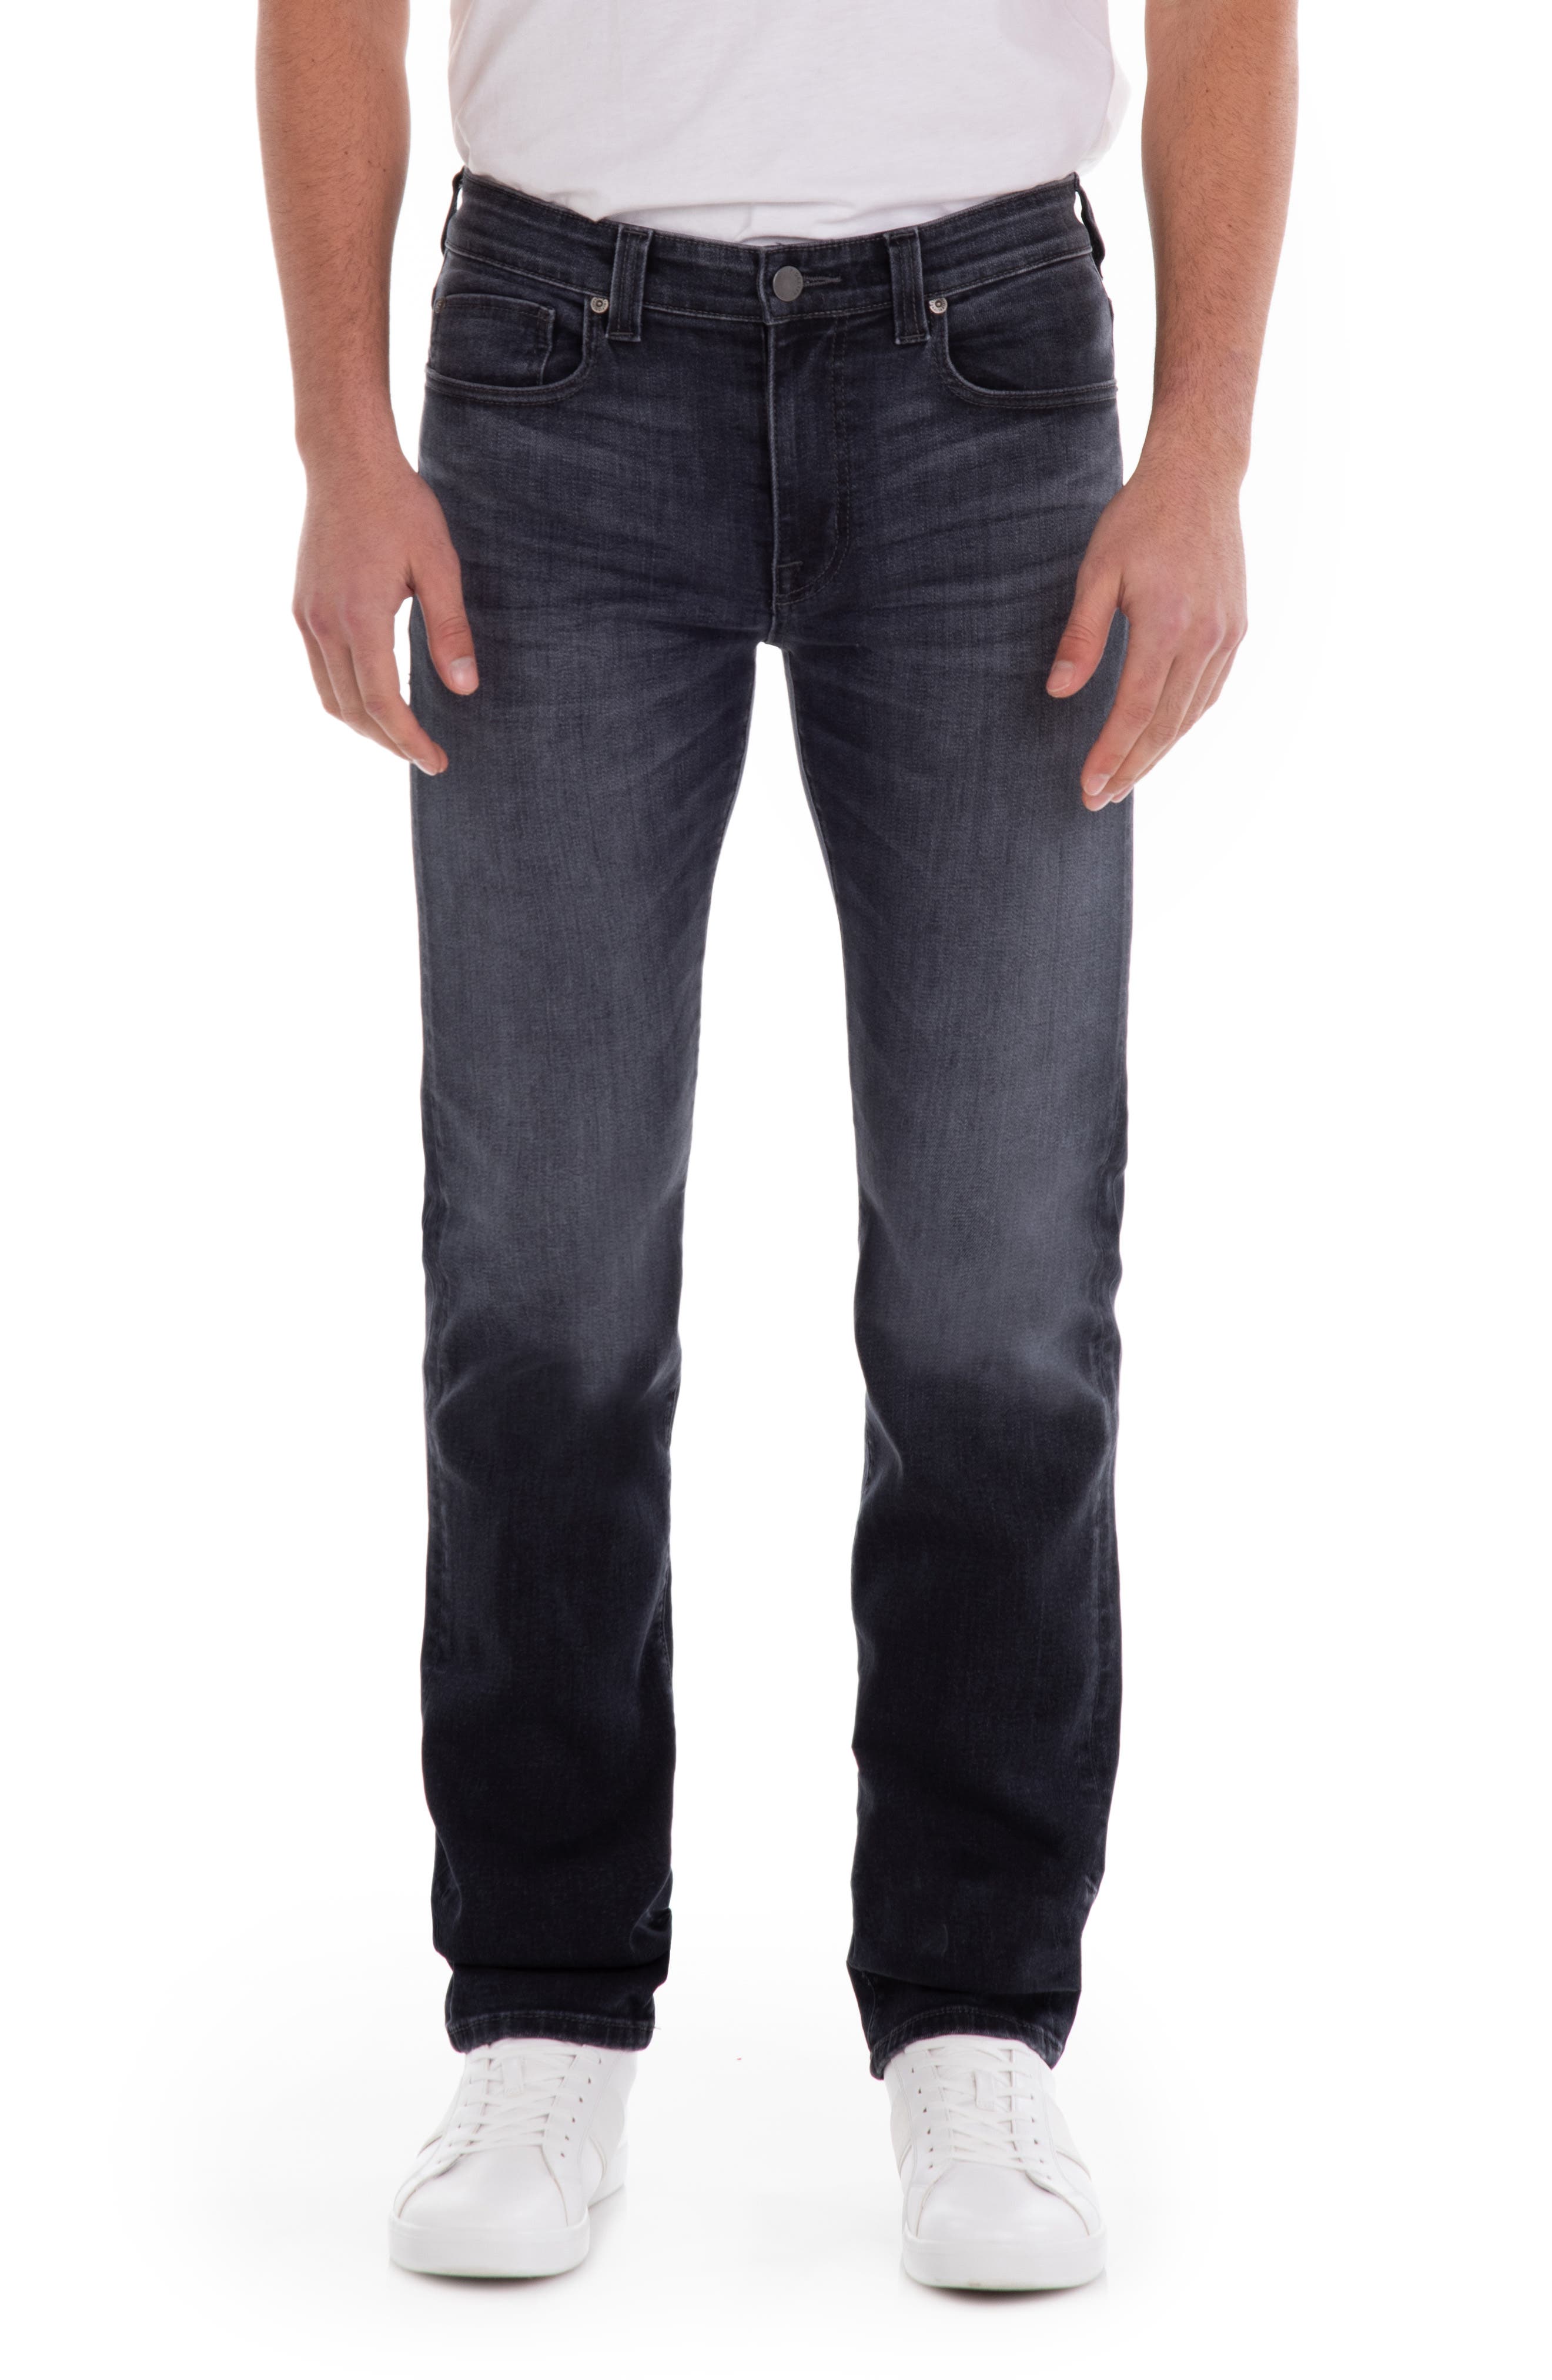 men's relaxed fit jeans sale